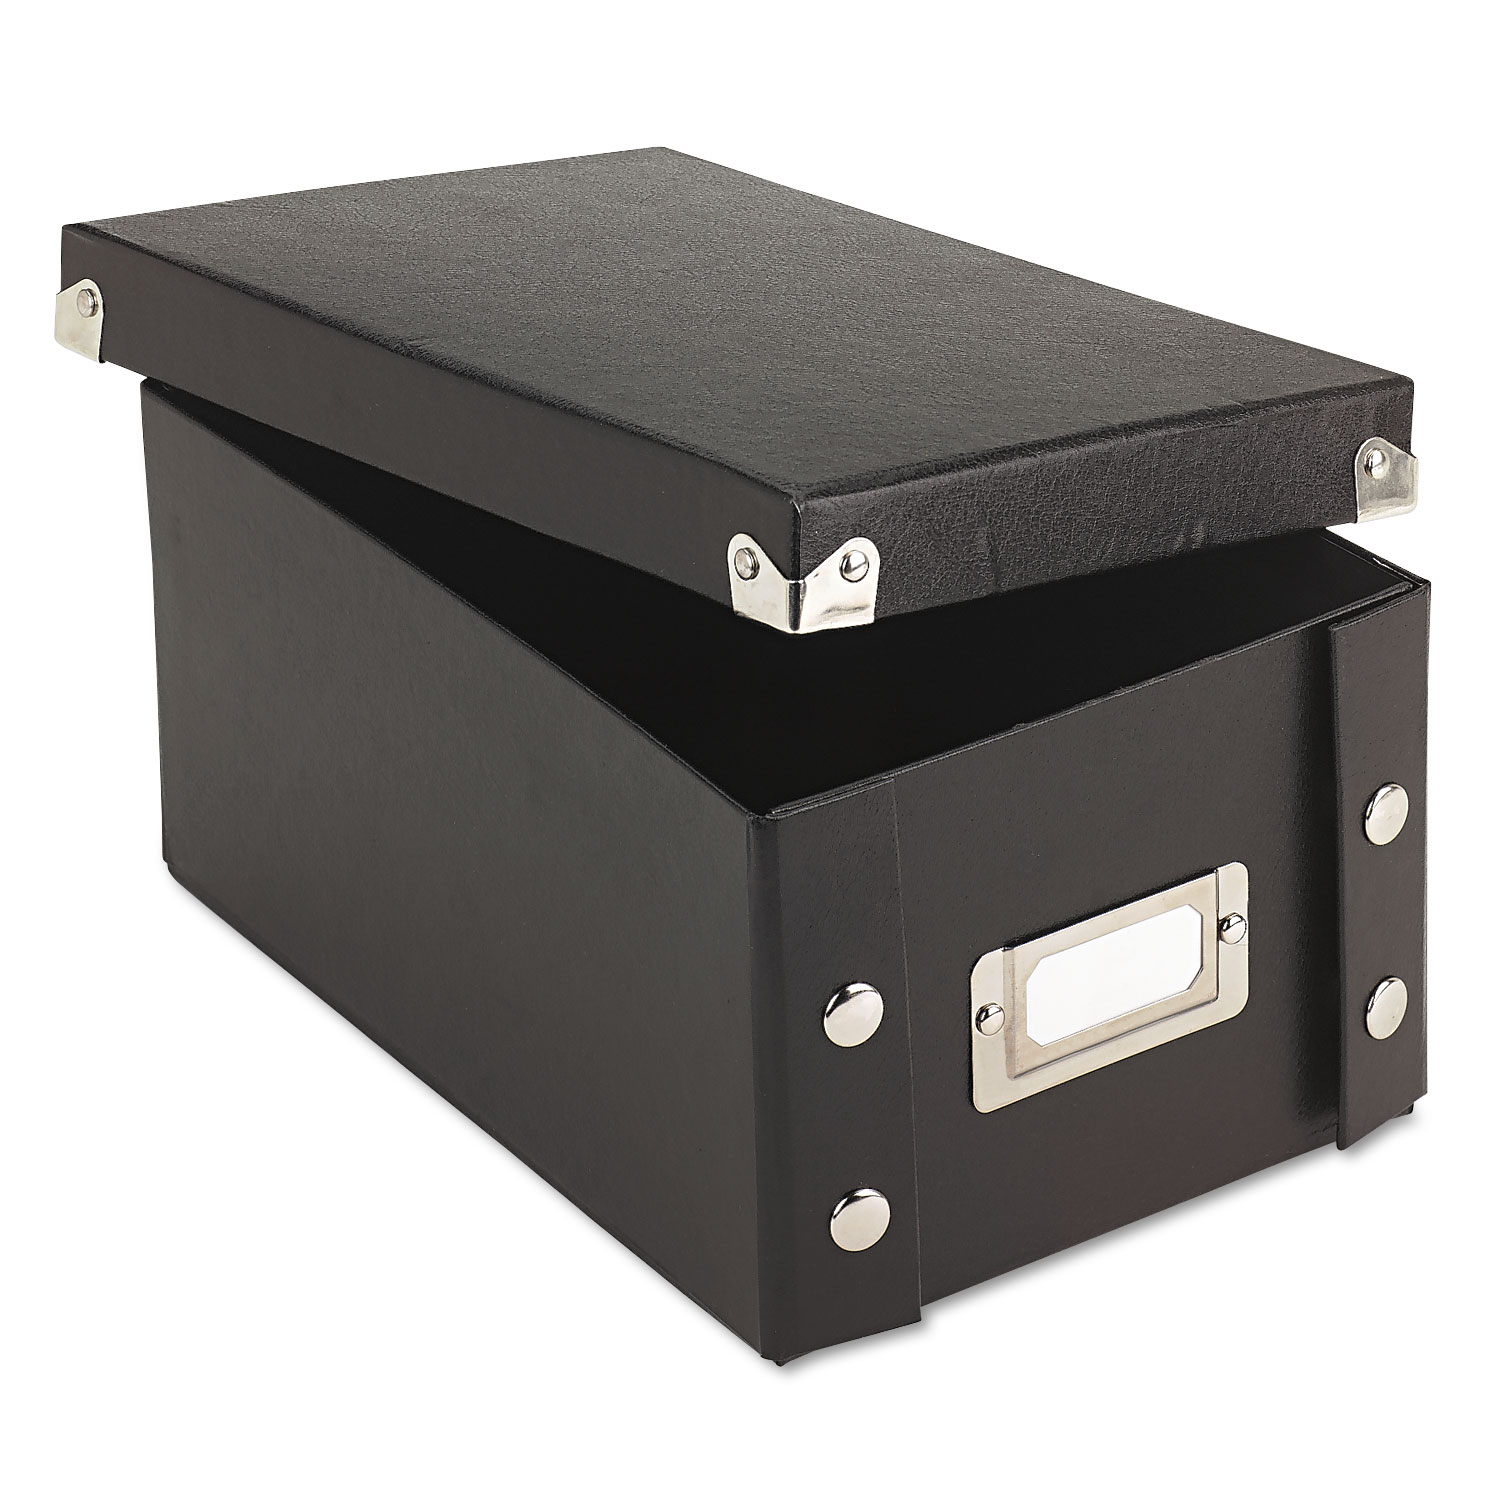  Snap-N-Store SNS01577 Collapsible Index Card File Box, Holds 1,100 4 x 6 Cards, Black (IDESNS01577) 